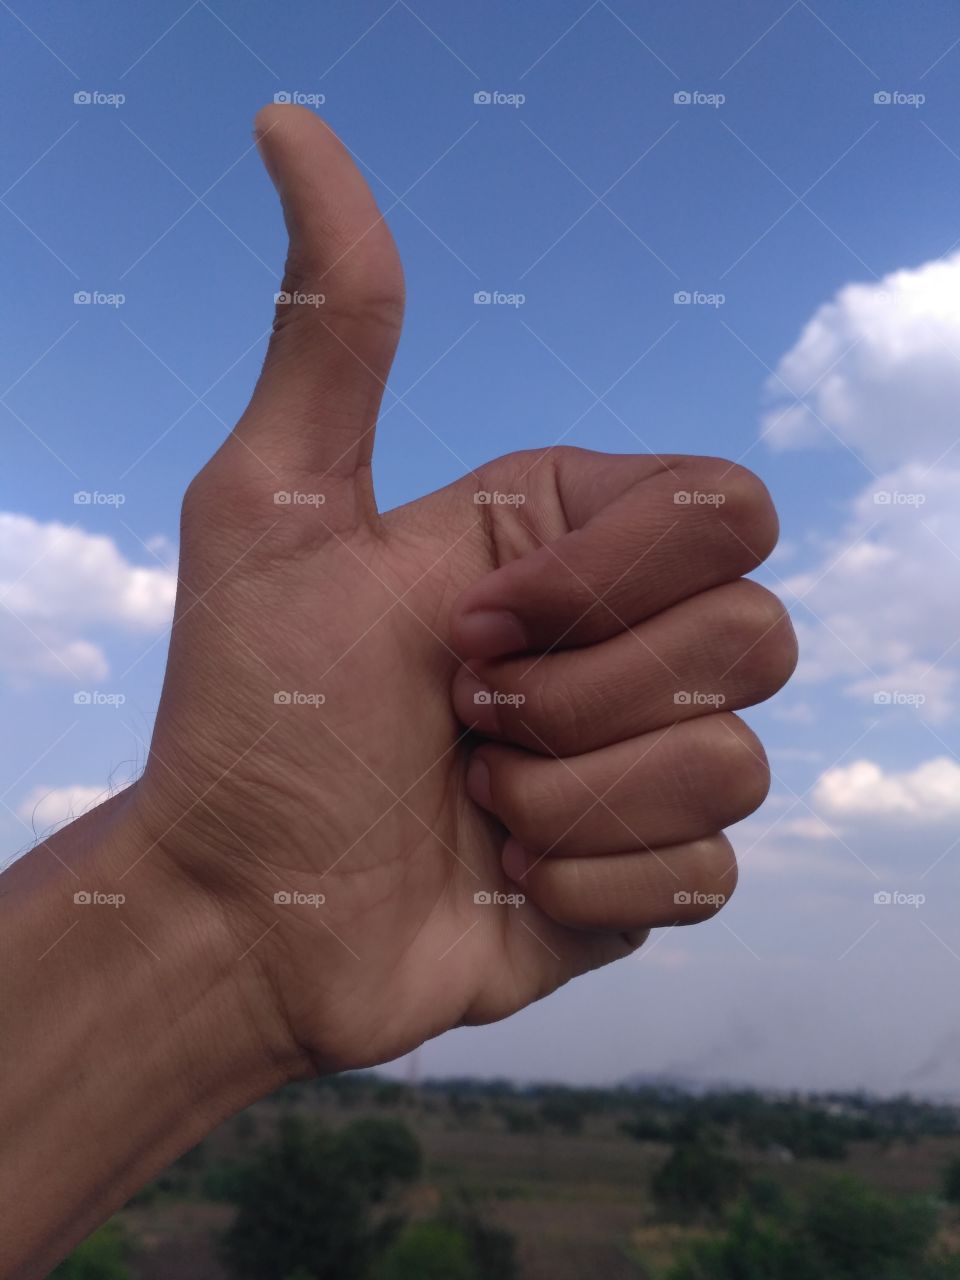 Thumbs Up ! in front of Cloudy sky / it's Ok / gesture / clear sky / palm (hand) / fair weather